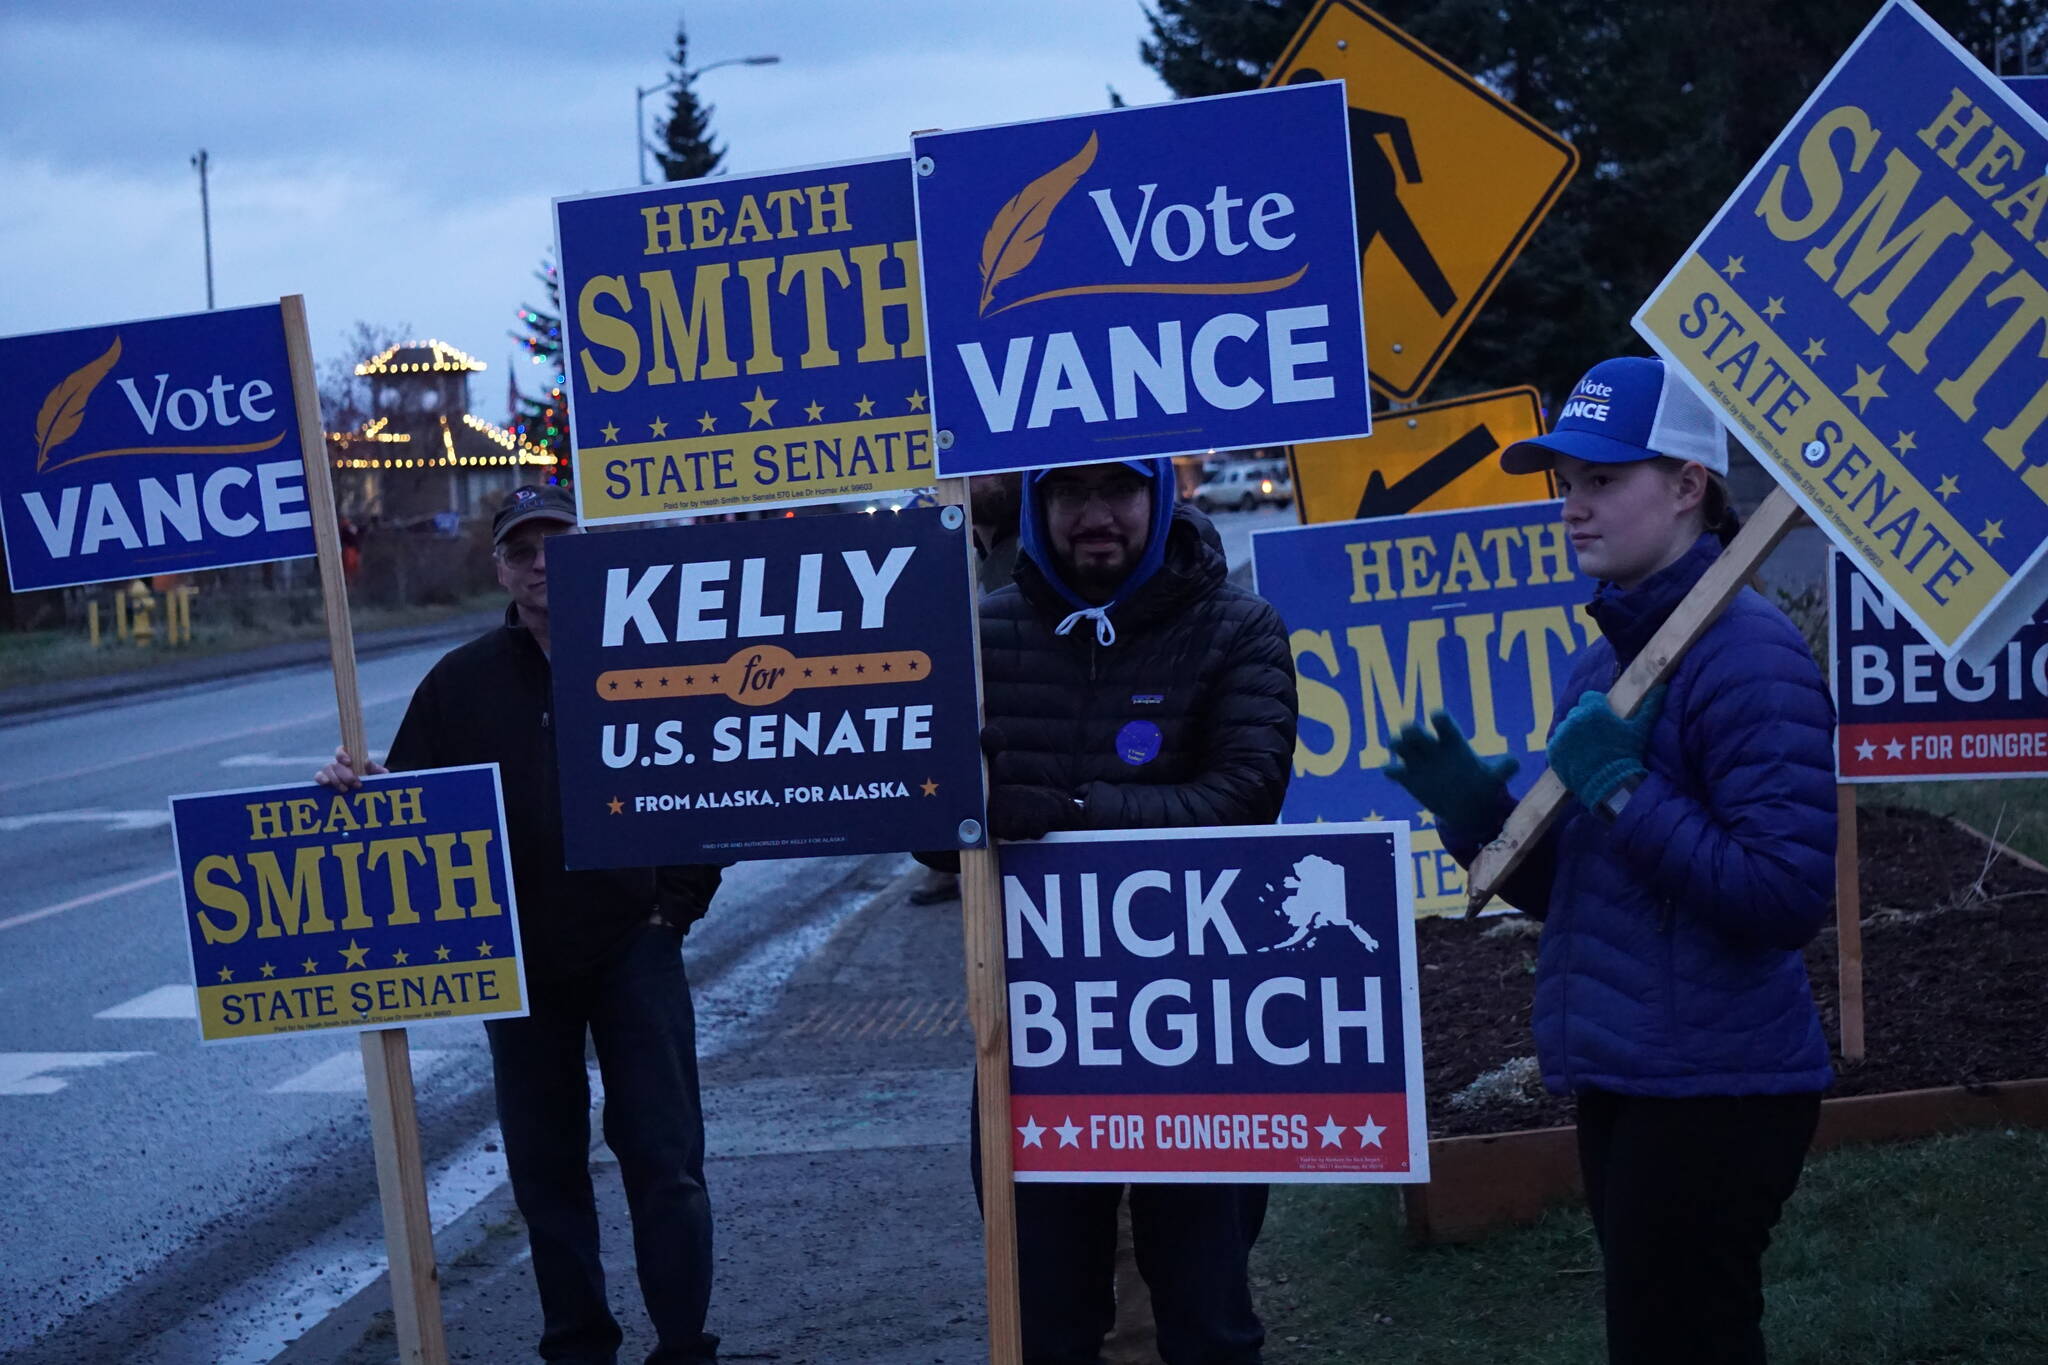 Republican Party supporters wave signs on Tuesday, Nov. 8. 2022, on Pioneer Avenue in Homer, Alaska, in support of Republican Party candidates Rep. Sarah Vance, R-Homer, Heath Smith, running for State Senate District C, Kelly Tshibaka, running for U.S. Senate, and Nick Begich III, running for U.S. Congress. (Photo by Michael Armstrong/Homer News)